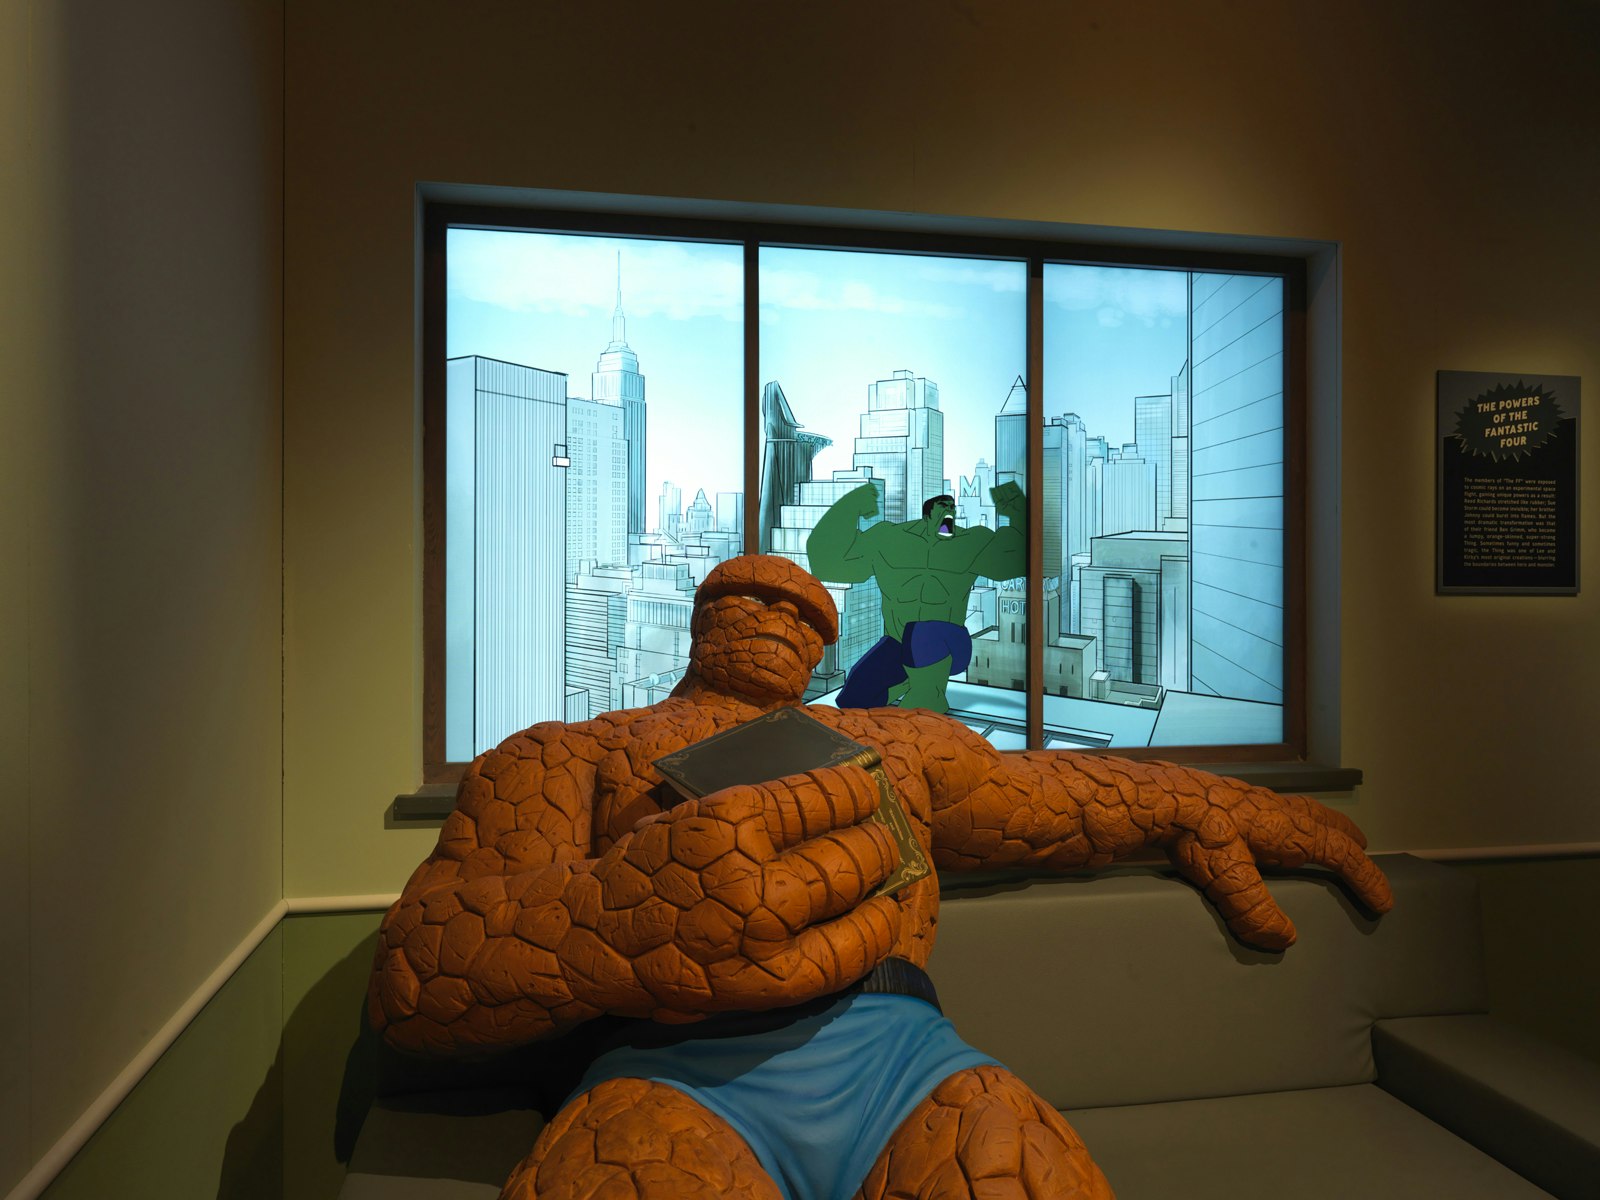 The Incredible Hulk room at a Marvel exhibition